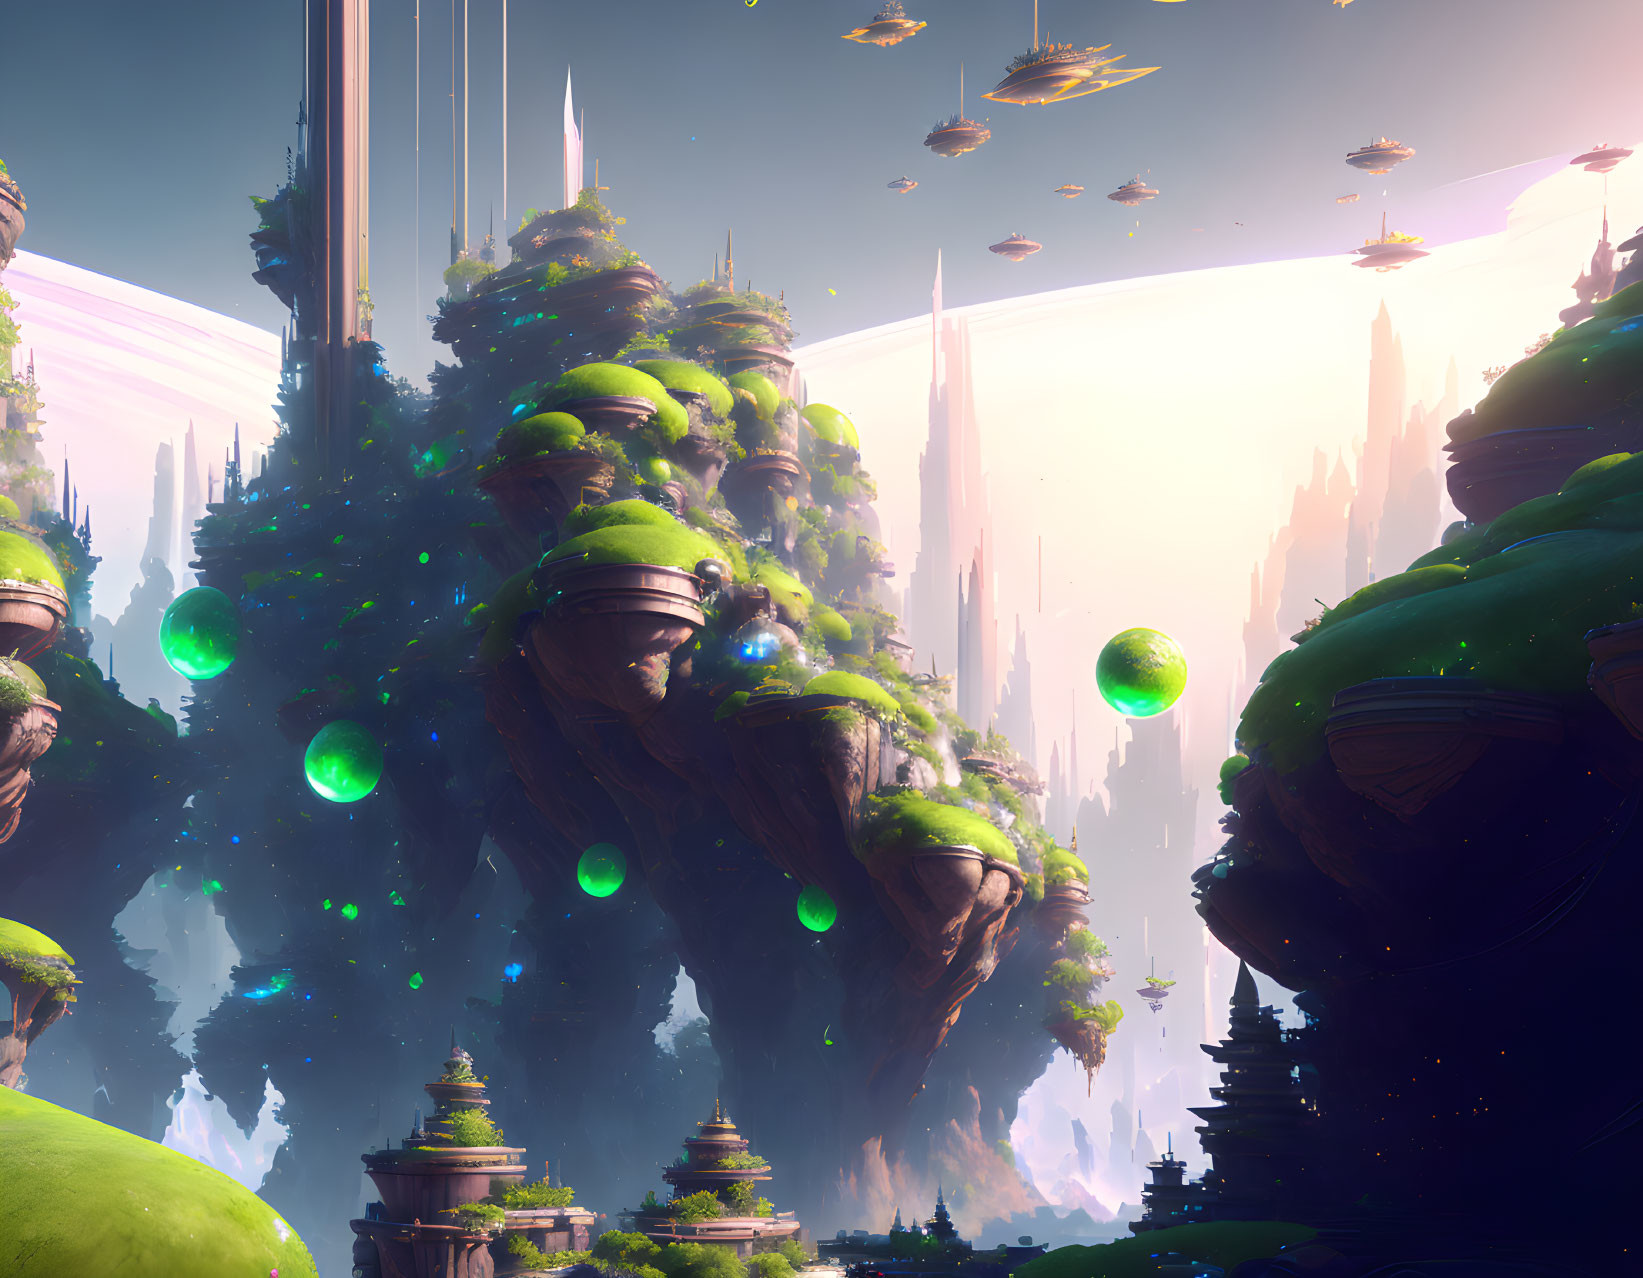 Futuristic fantasy landscape with floating islands, greenery, Oriental-style structures, glowing orbs, and